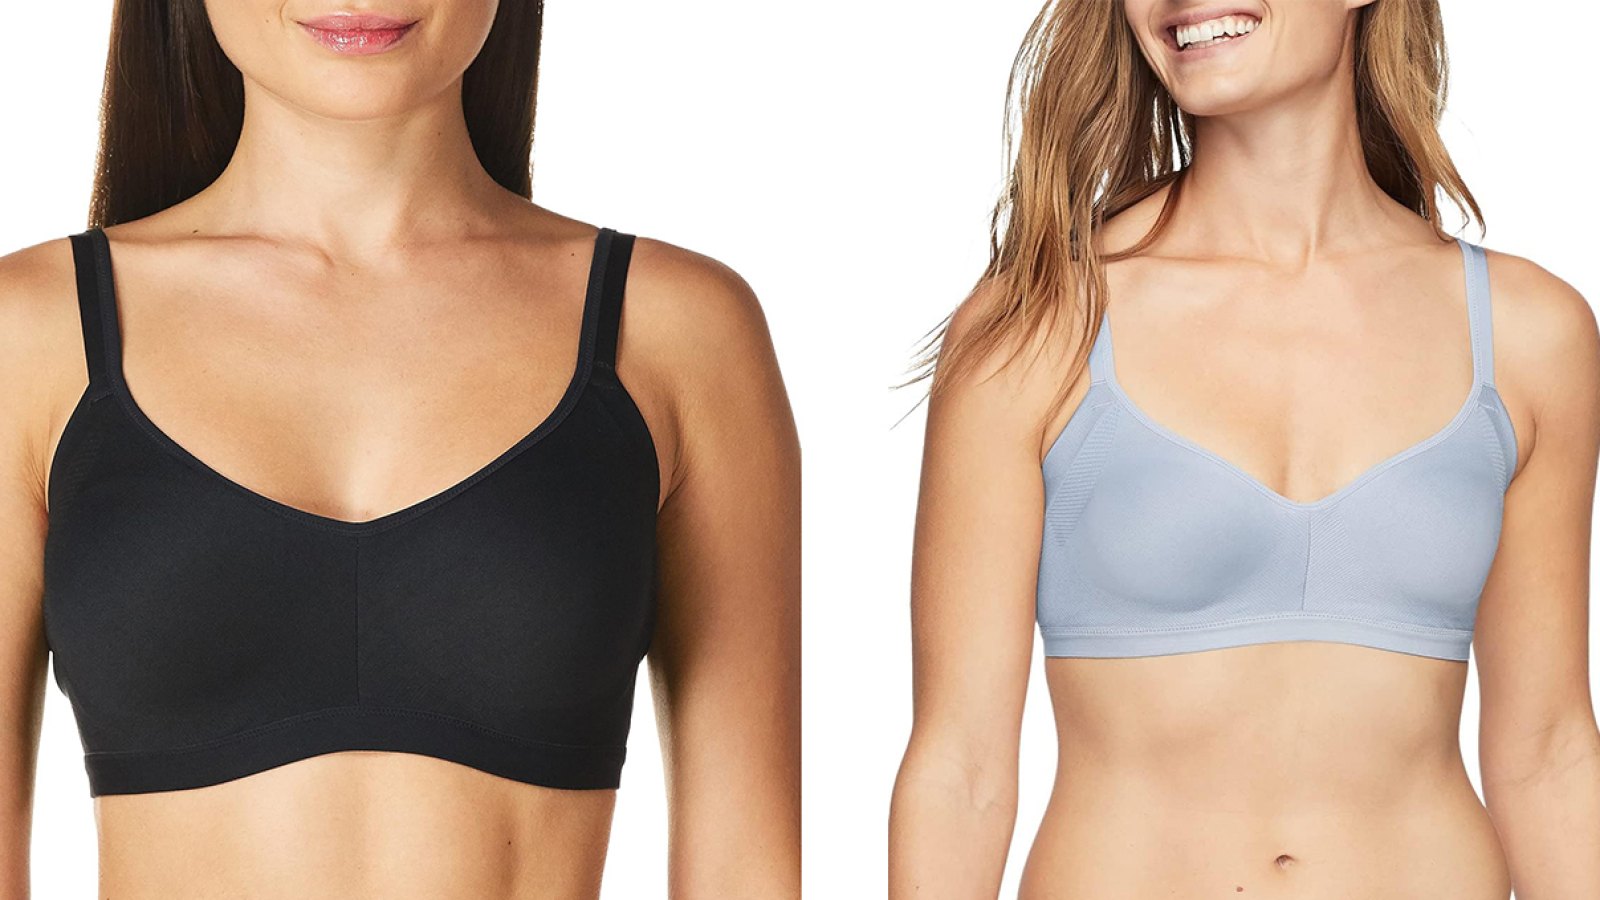 This Comfy Warner's Bra Has 43K Reviews and Is Now 50% Off